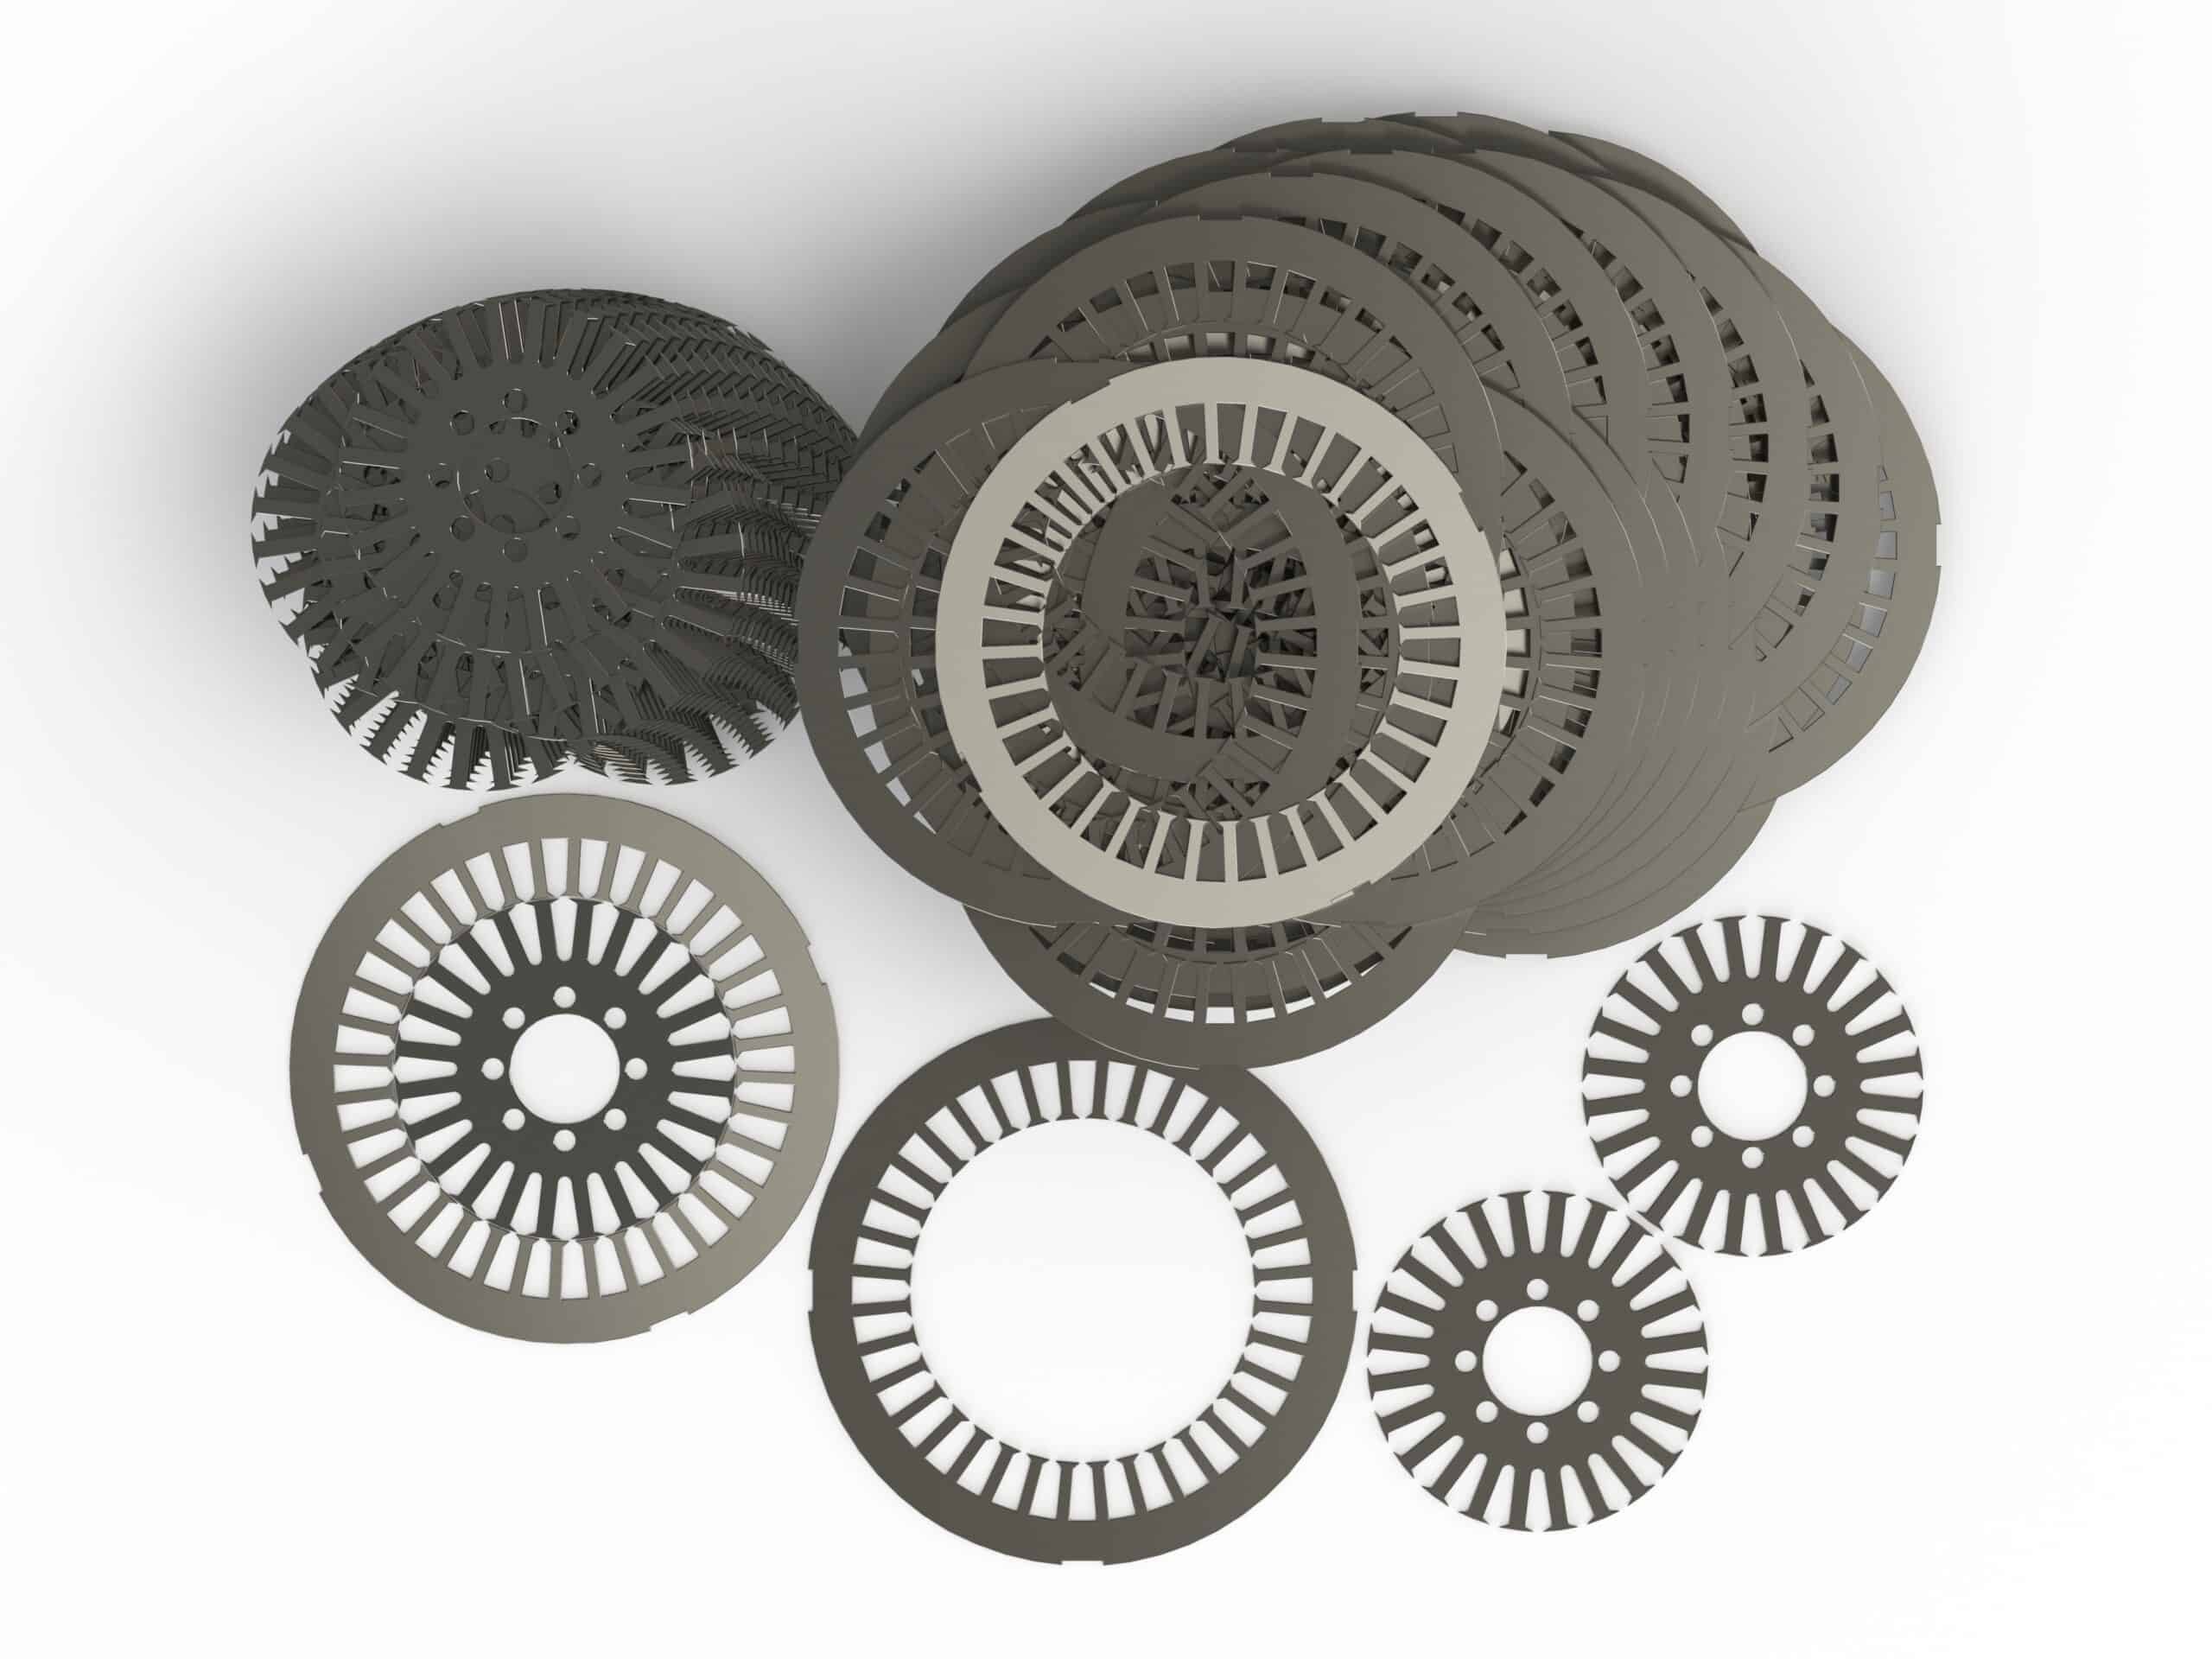 Stator,And,Rotor,Electromagnetic,Sheet,For,Electric,Motor,3d,Illustration